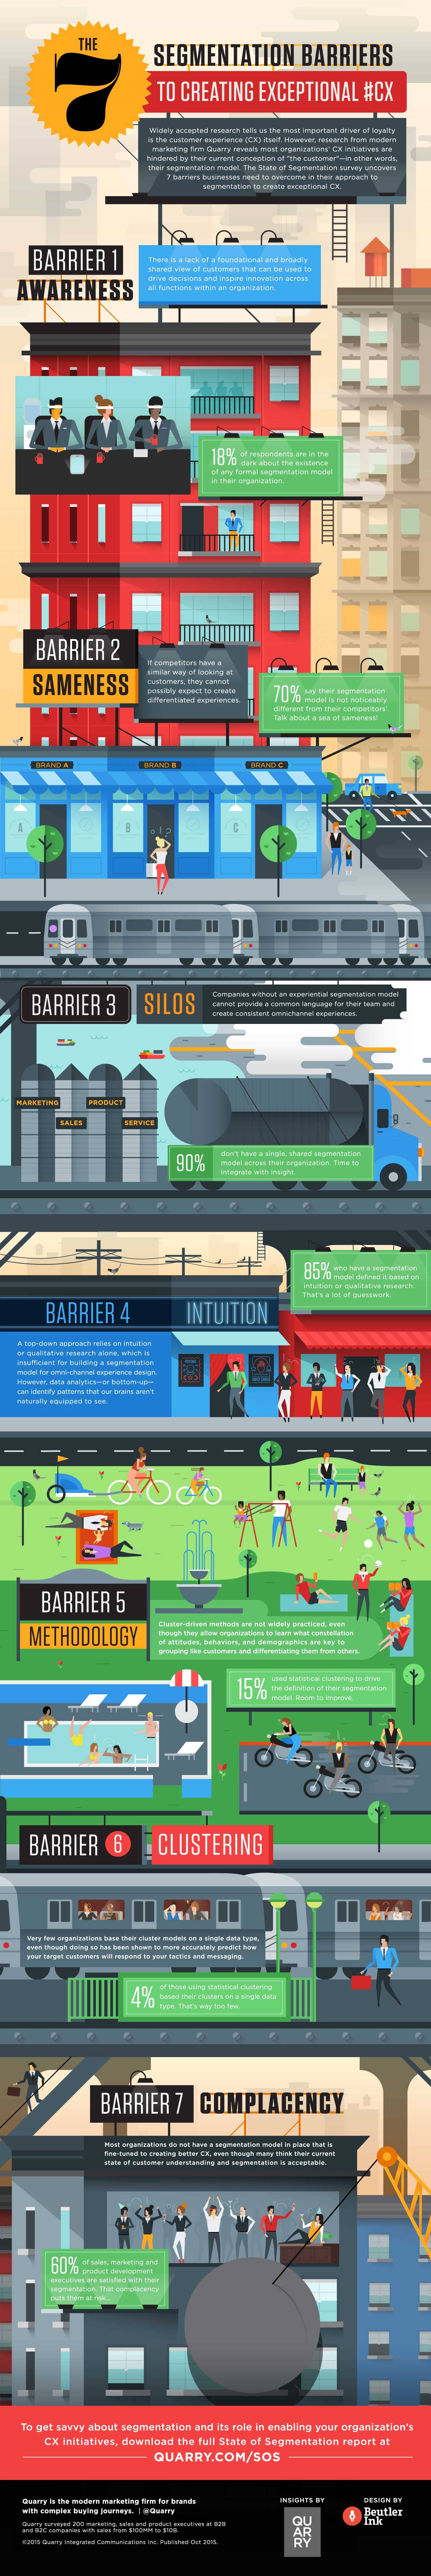 The 7 Segmentation Barriers to Creating Exceptional #CX Infographic.